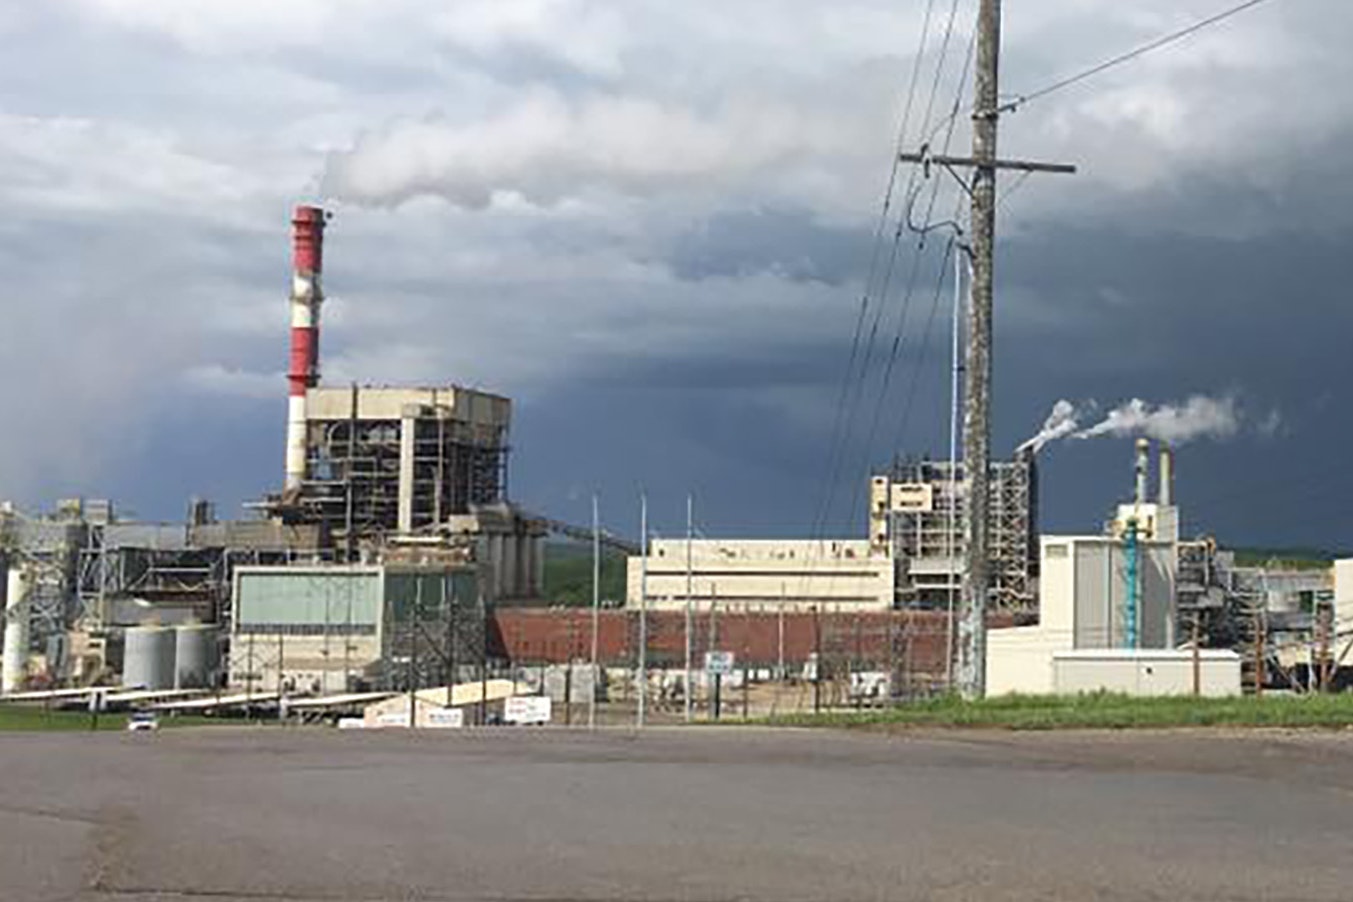 The Lawrence Energy Center in Kansas is a coal-fired power plant that will extend its life to power a new EV battery facility.